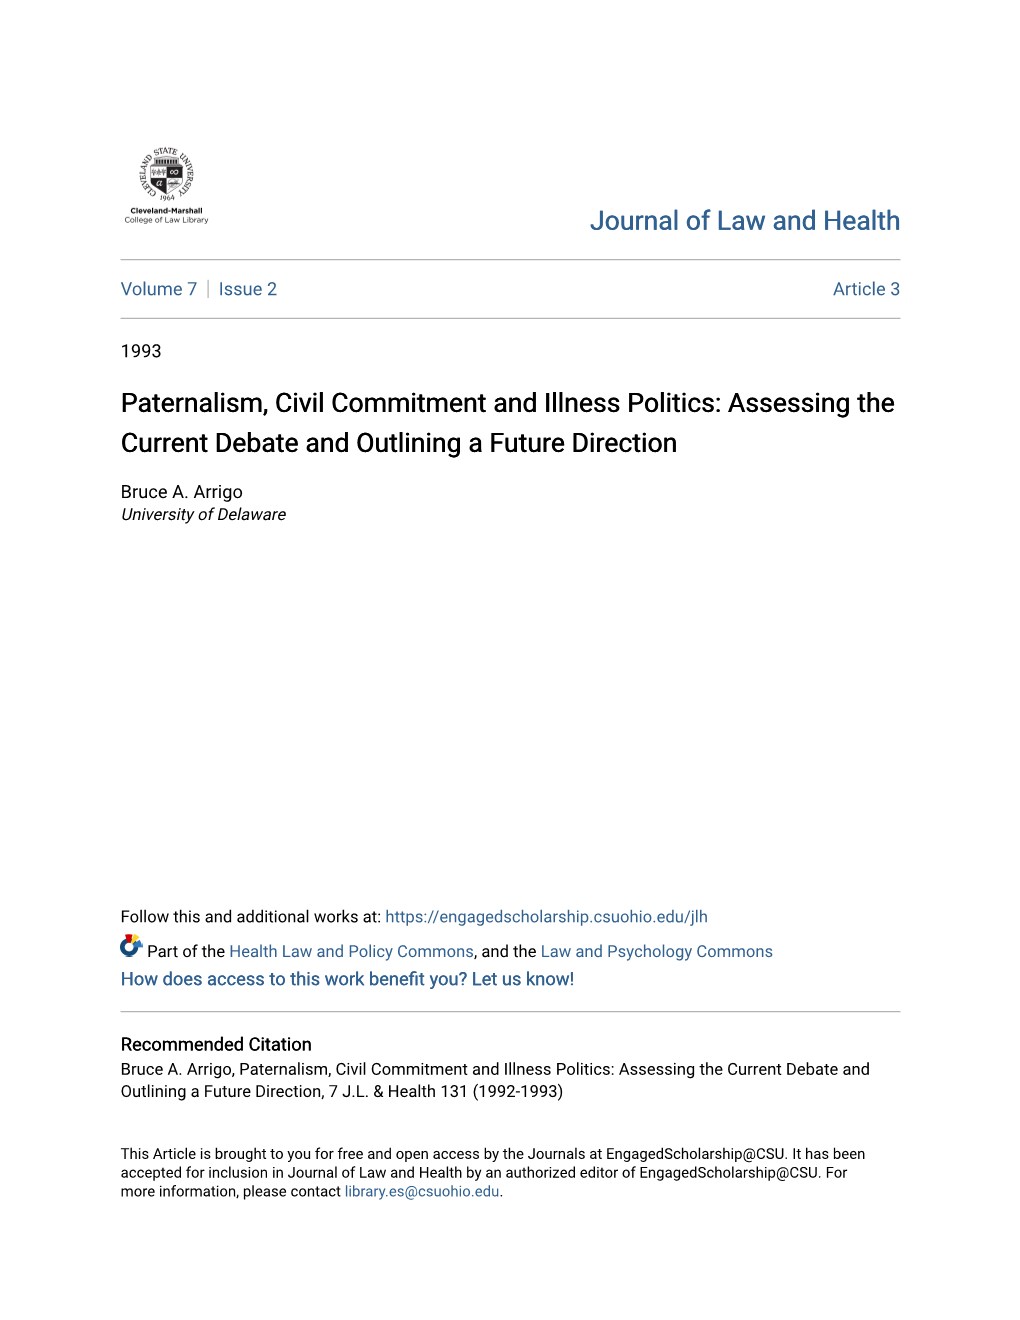 Paternalism, Civil Commitment and Illness Politics: Assessing the Current Debate and Outlining a Future Direction